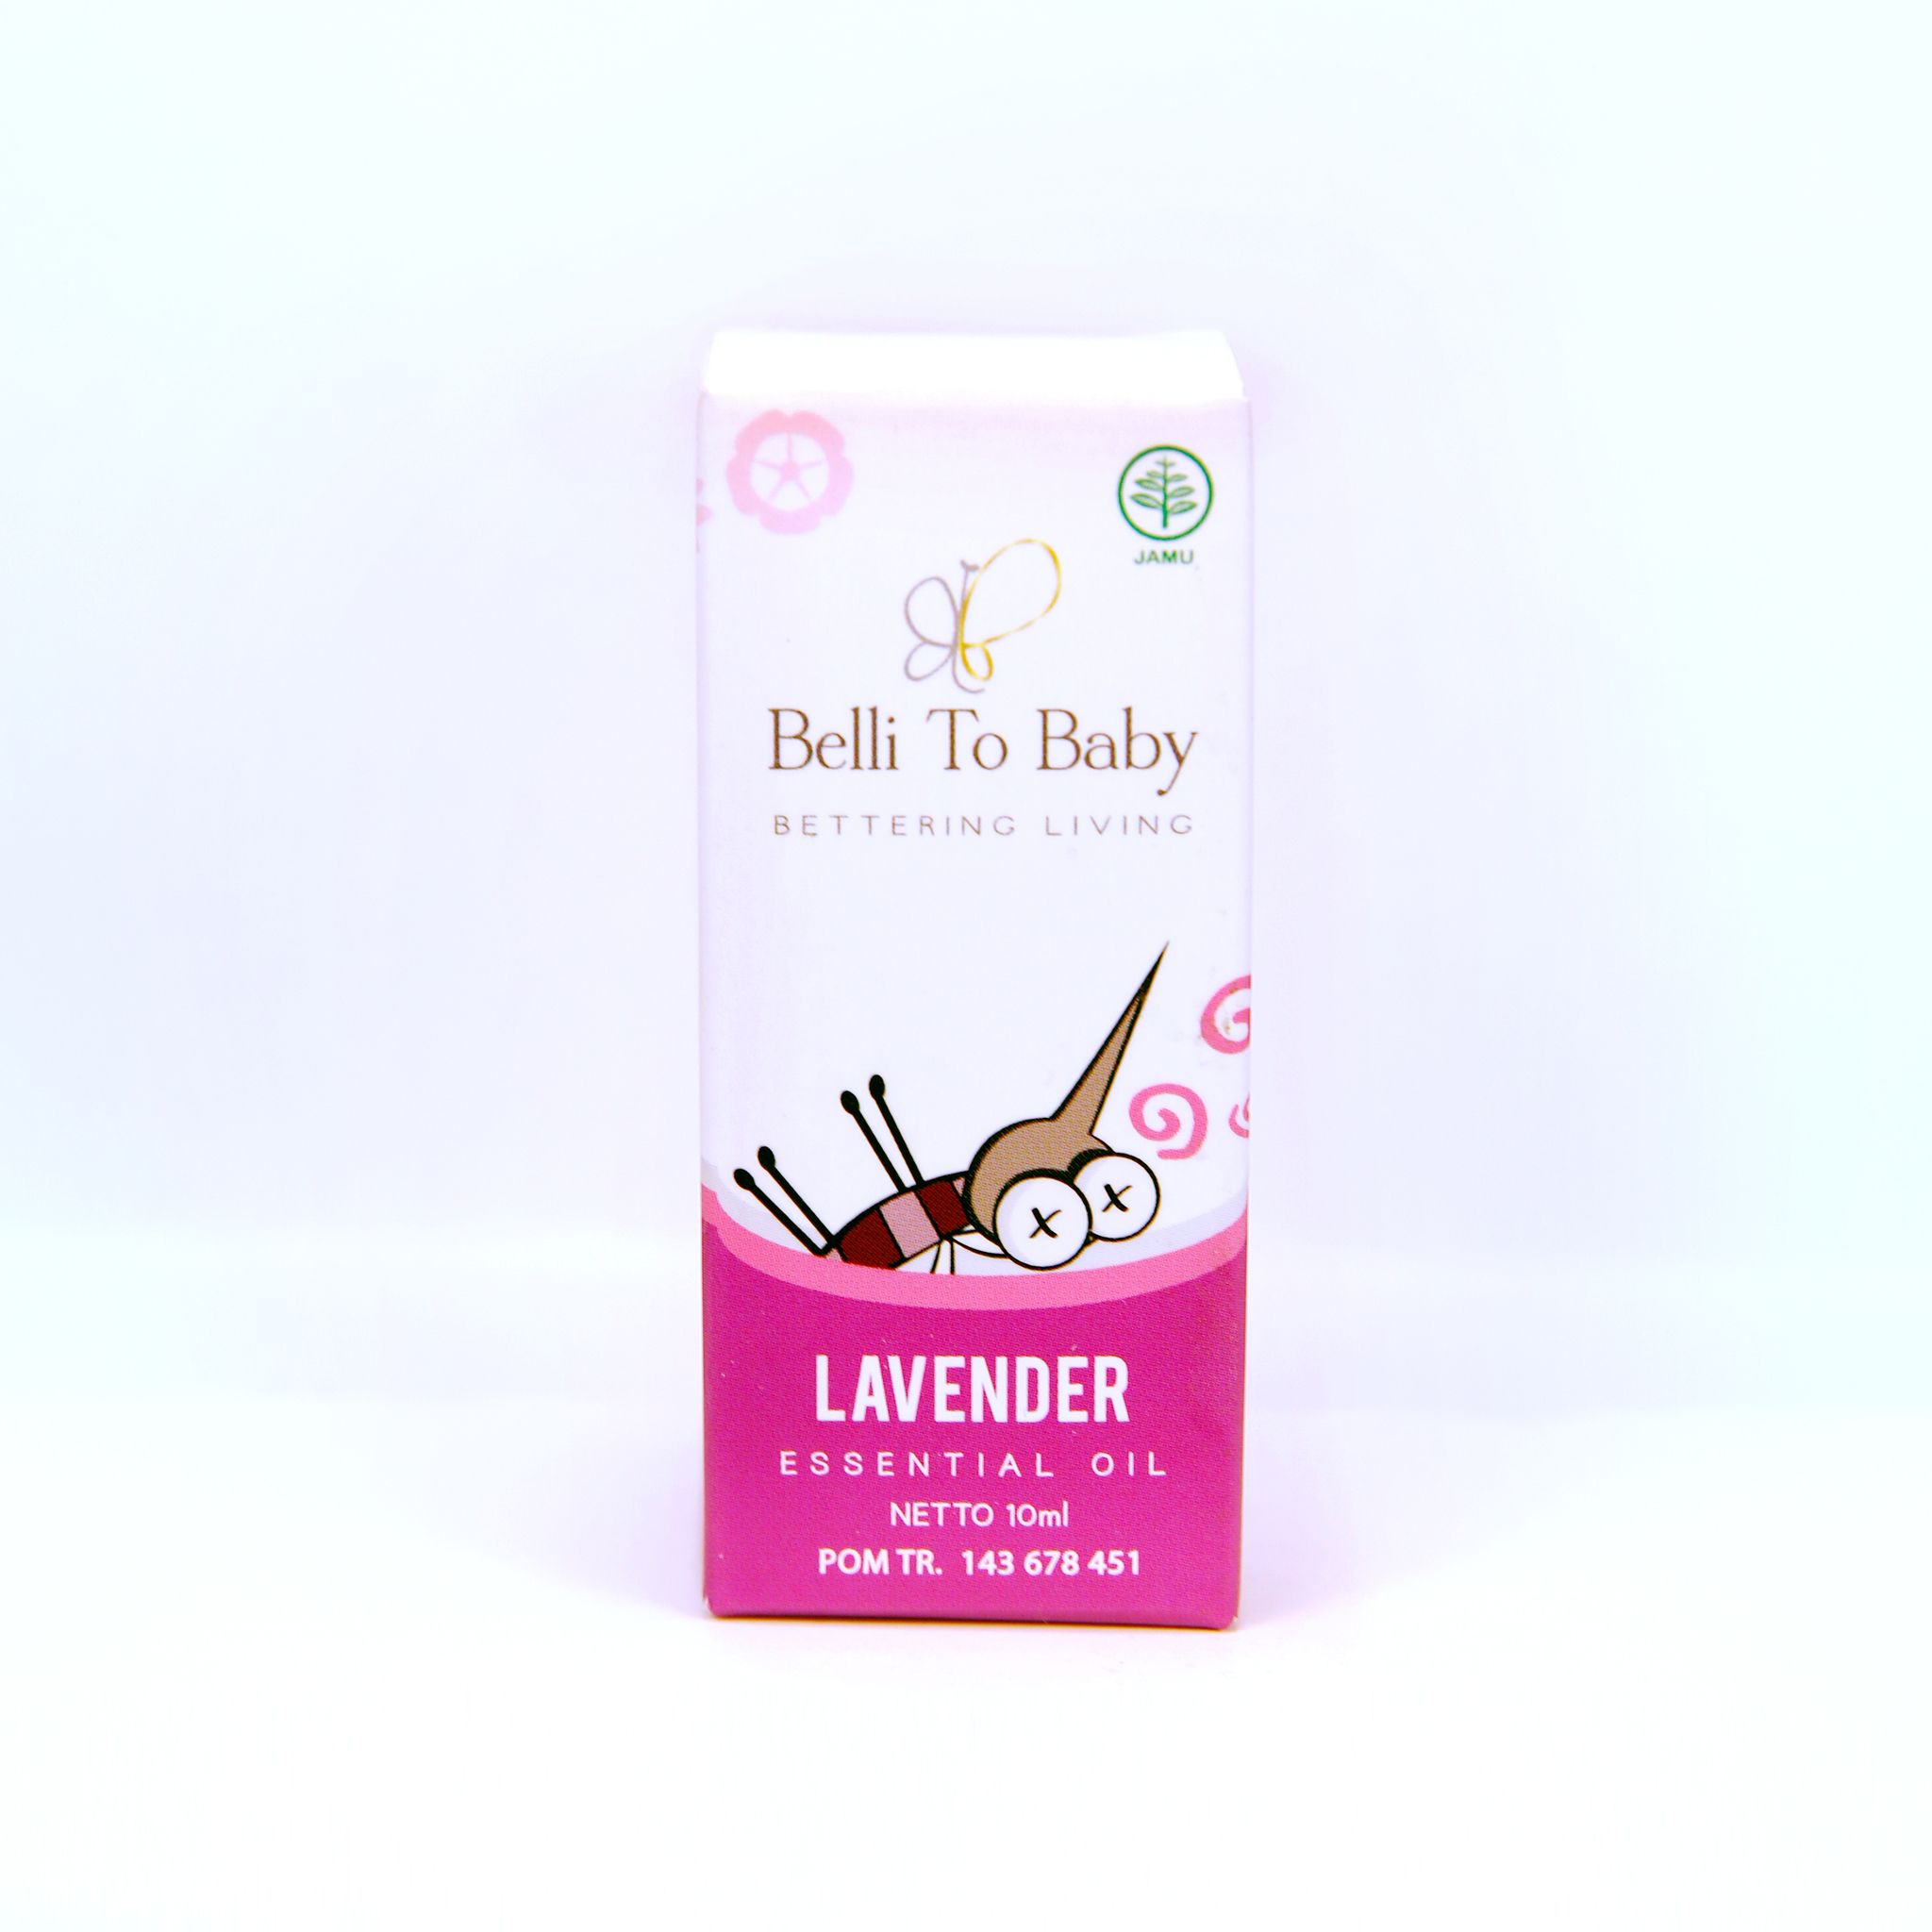 Belli To Baby Essential Oil Lavender 10ml - 4